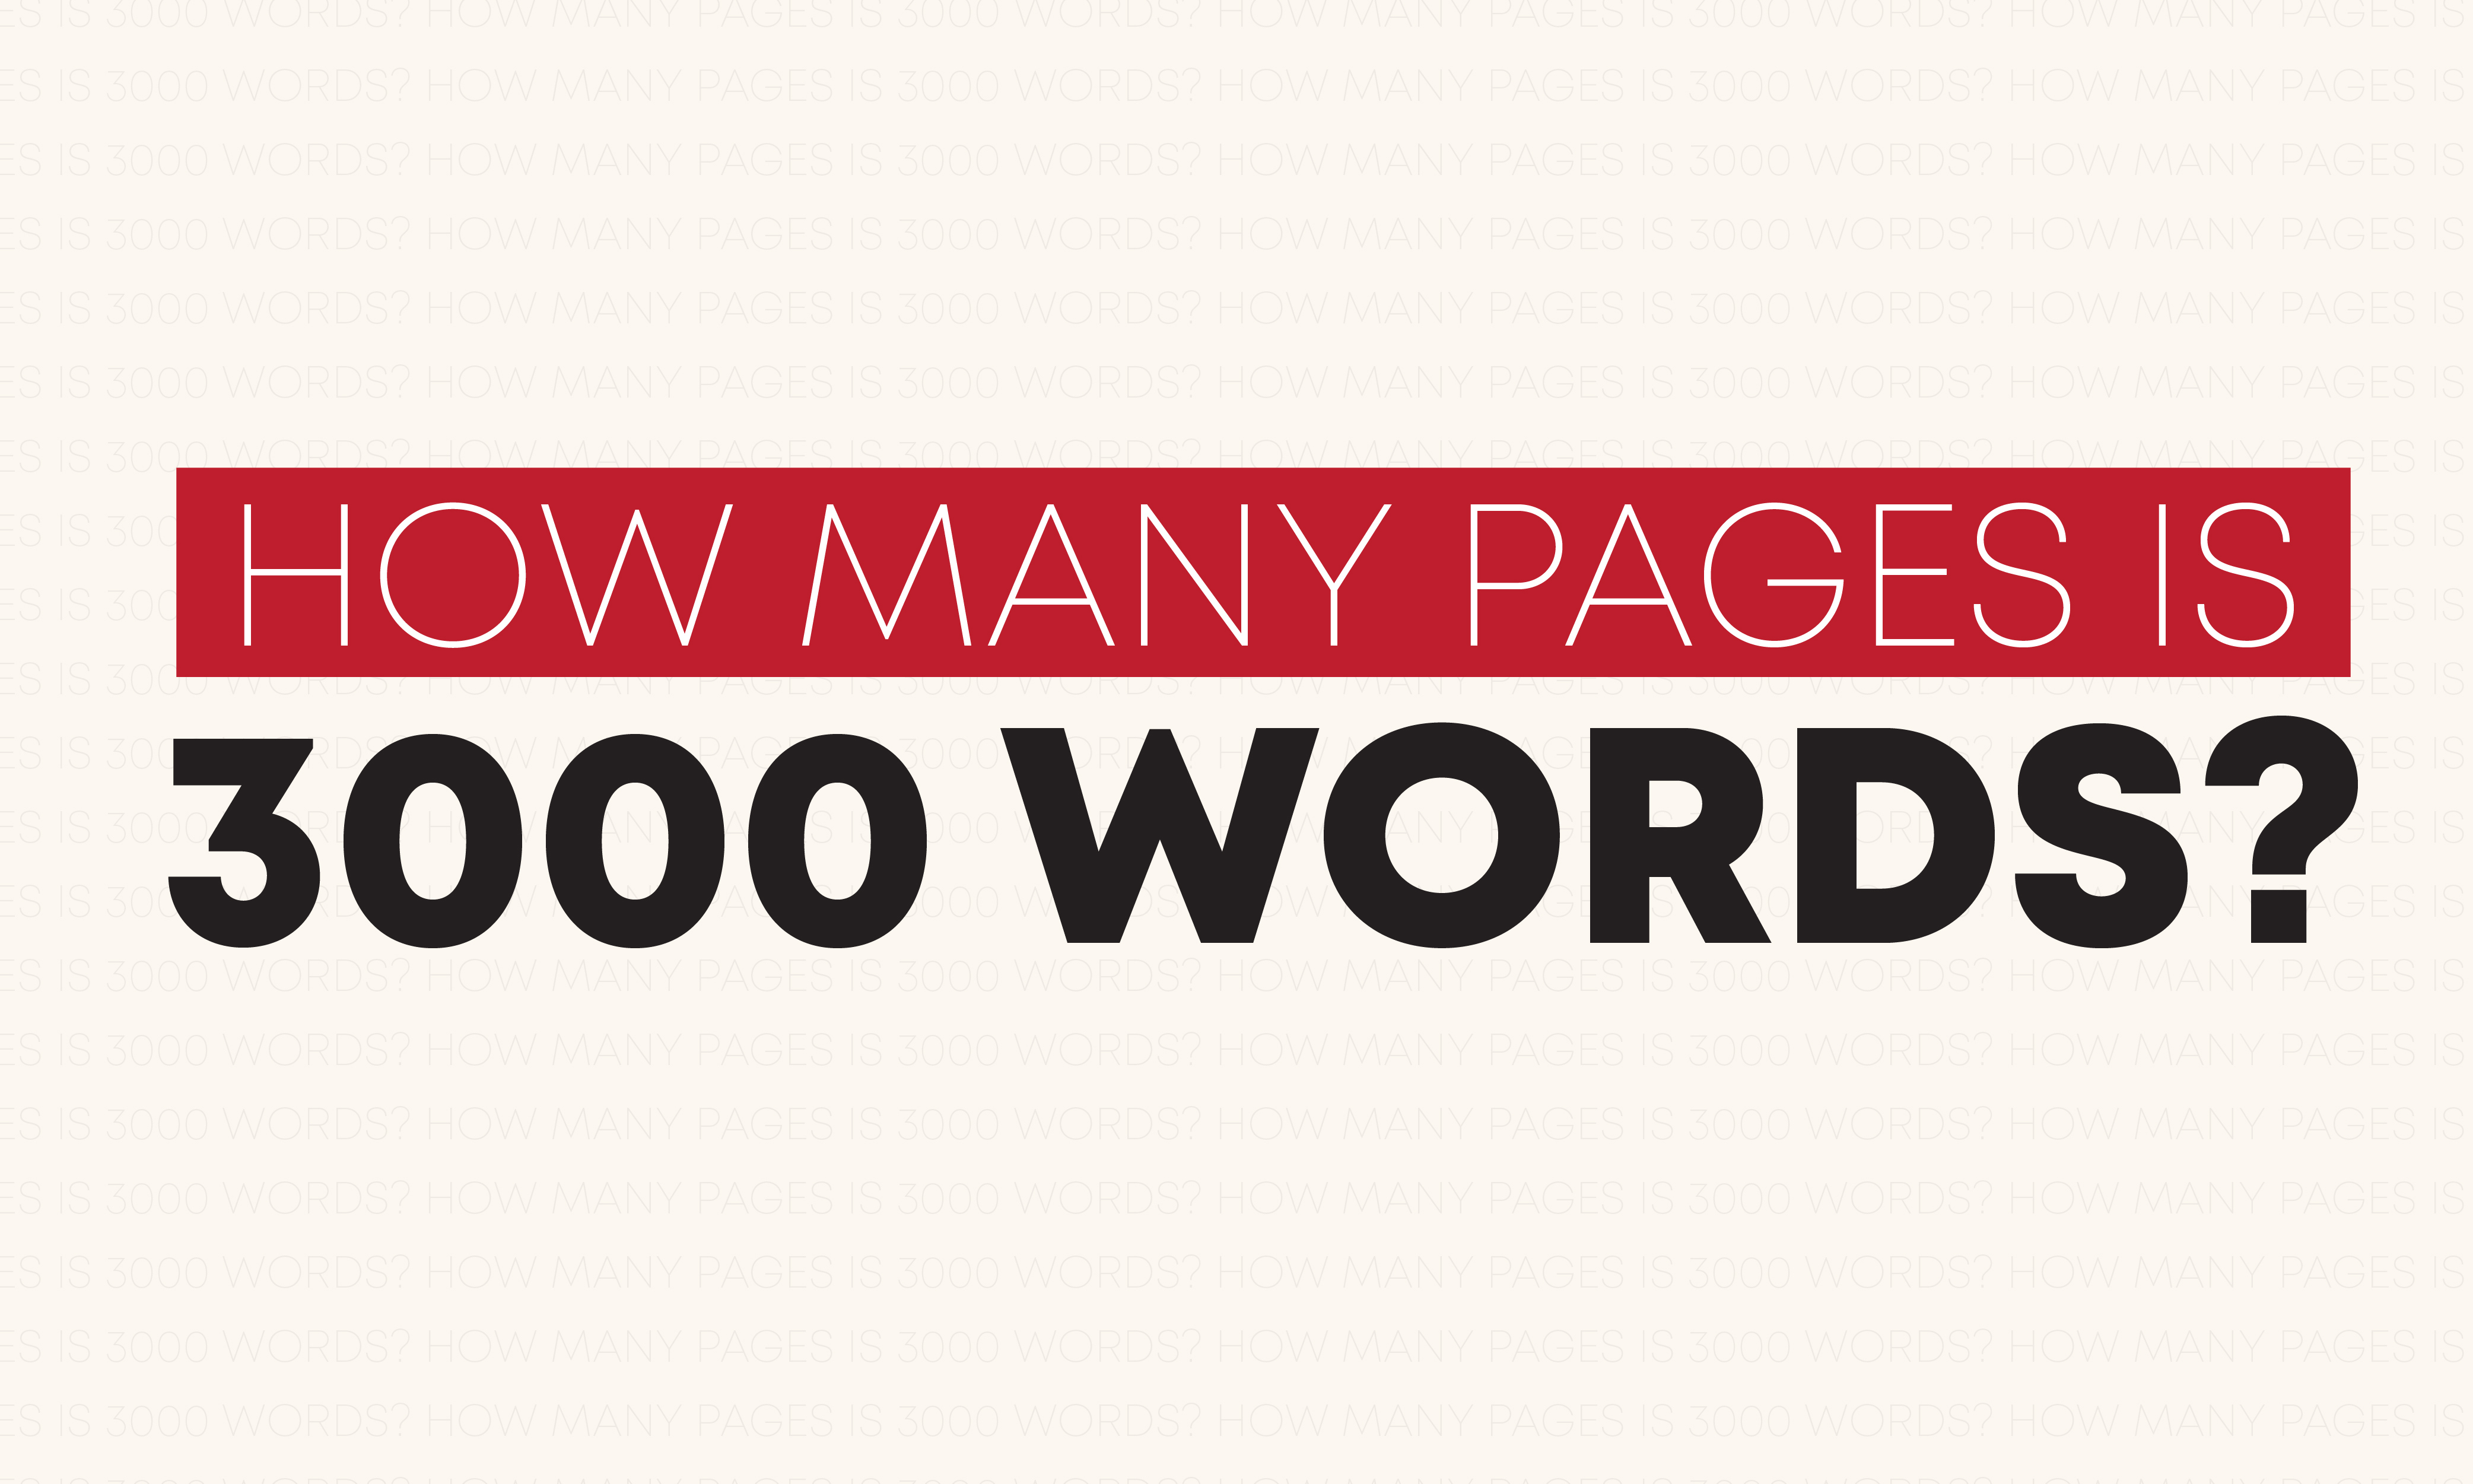 How many pages are 3,000 words?